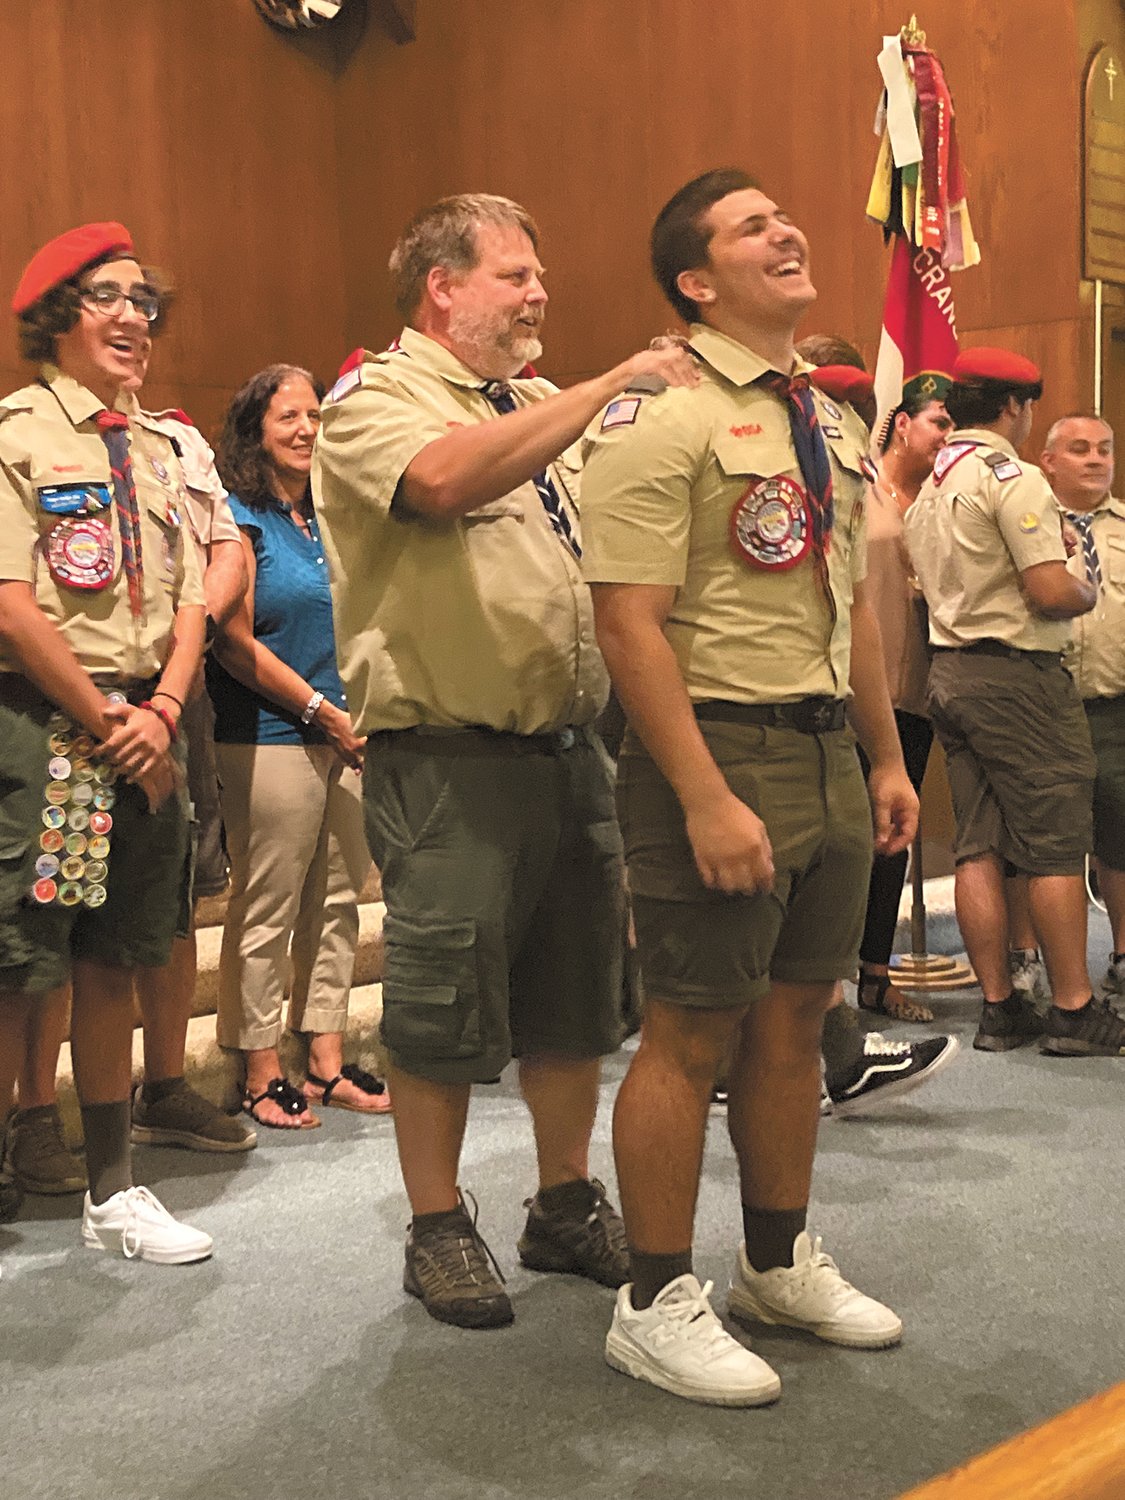 OFFICIALLY DUBBED EAGLE SCOUT: Scout master Jeff Goldthwait dubs Teddy Shackelford an Eagle Scout at the Troop 66 Garden City Eagle Scout ceremony on Aug. 18 at Lakewood Baptist Church. (Herald photo)